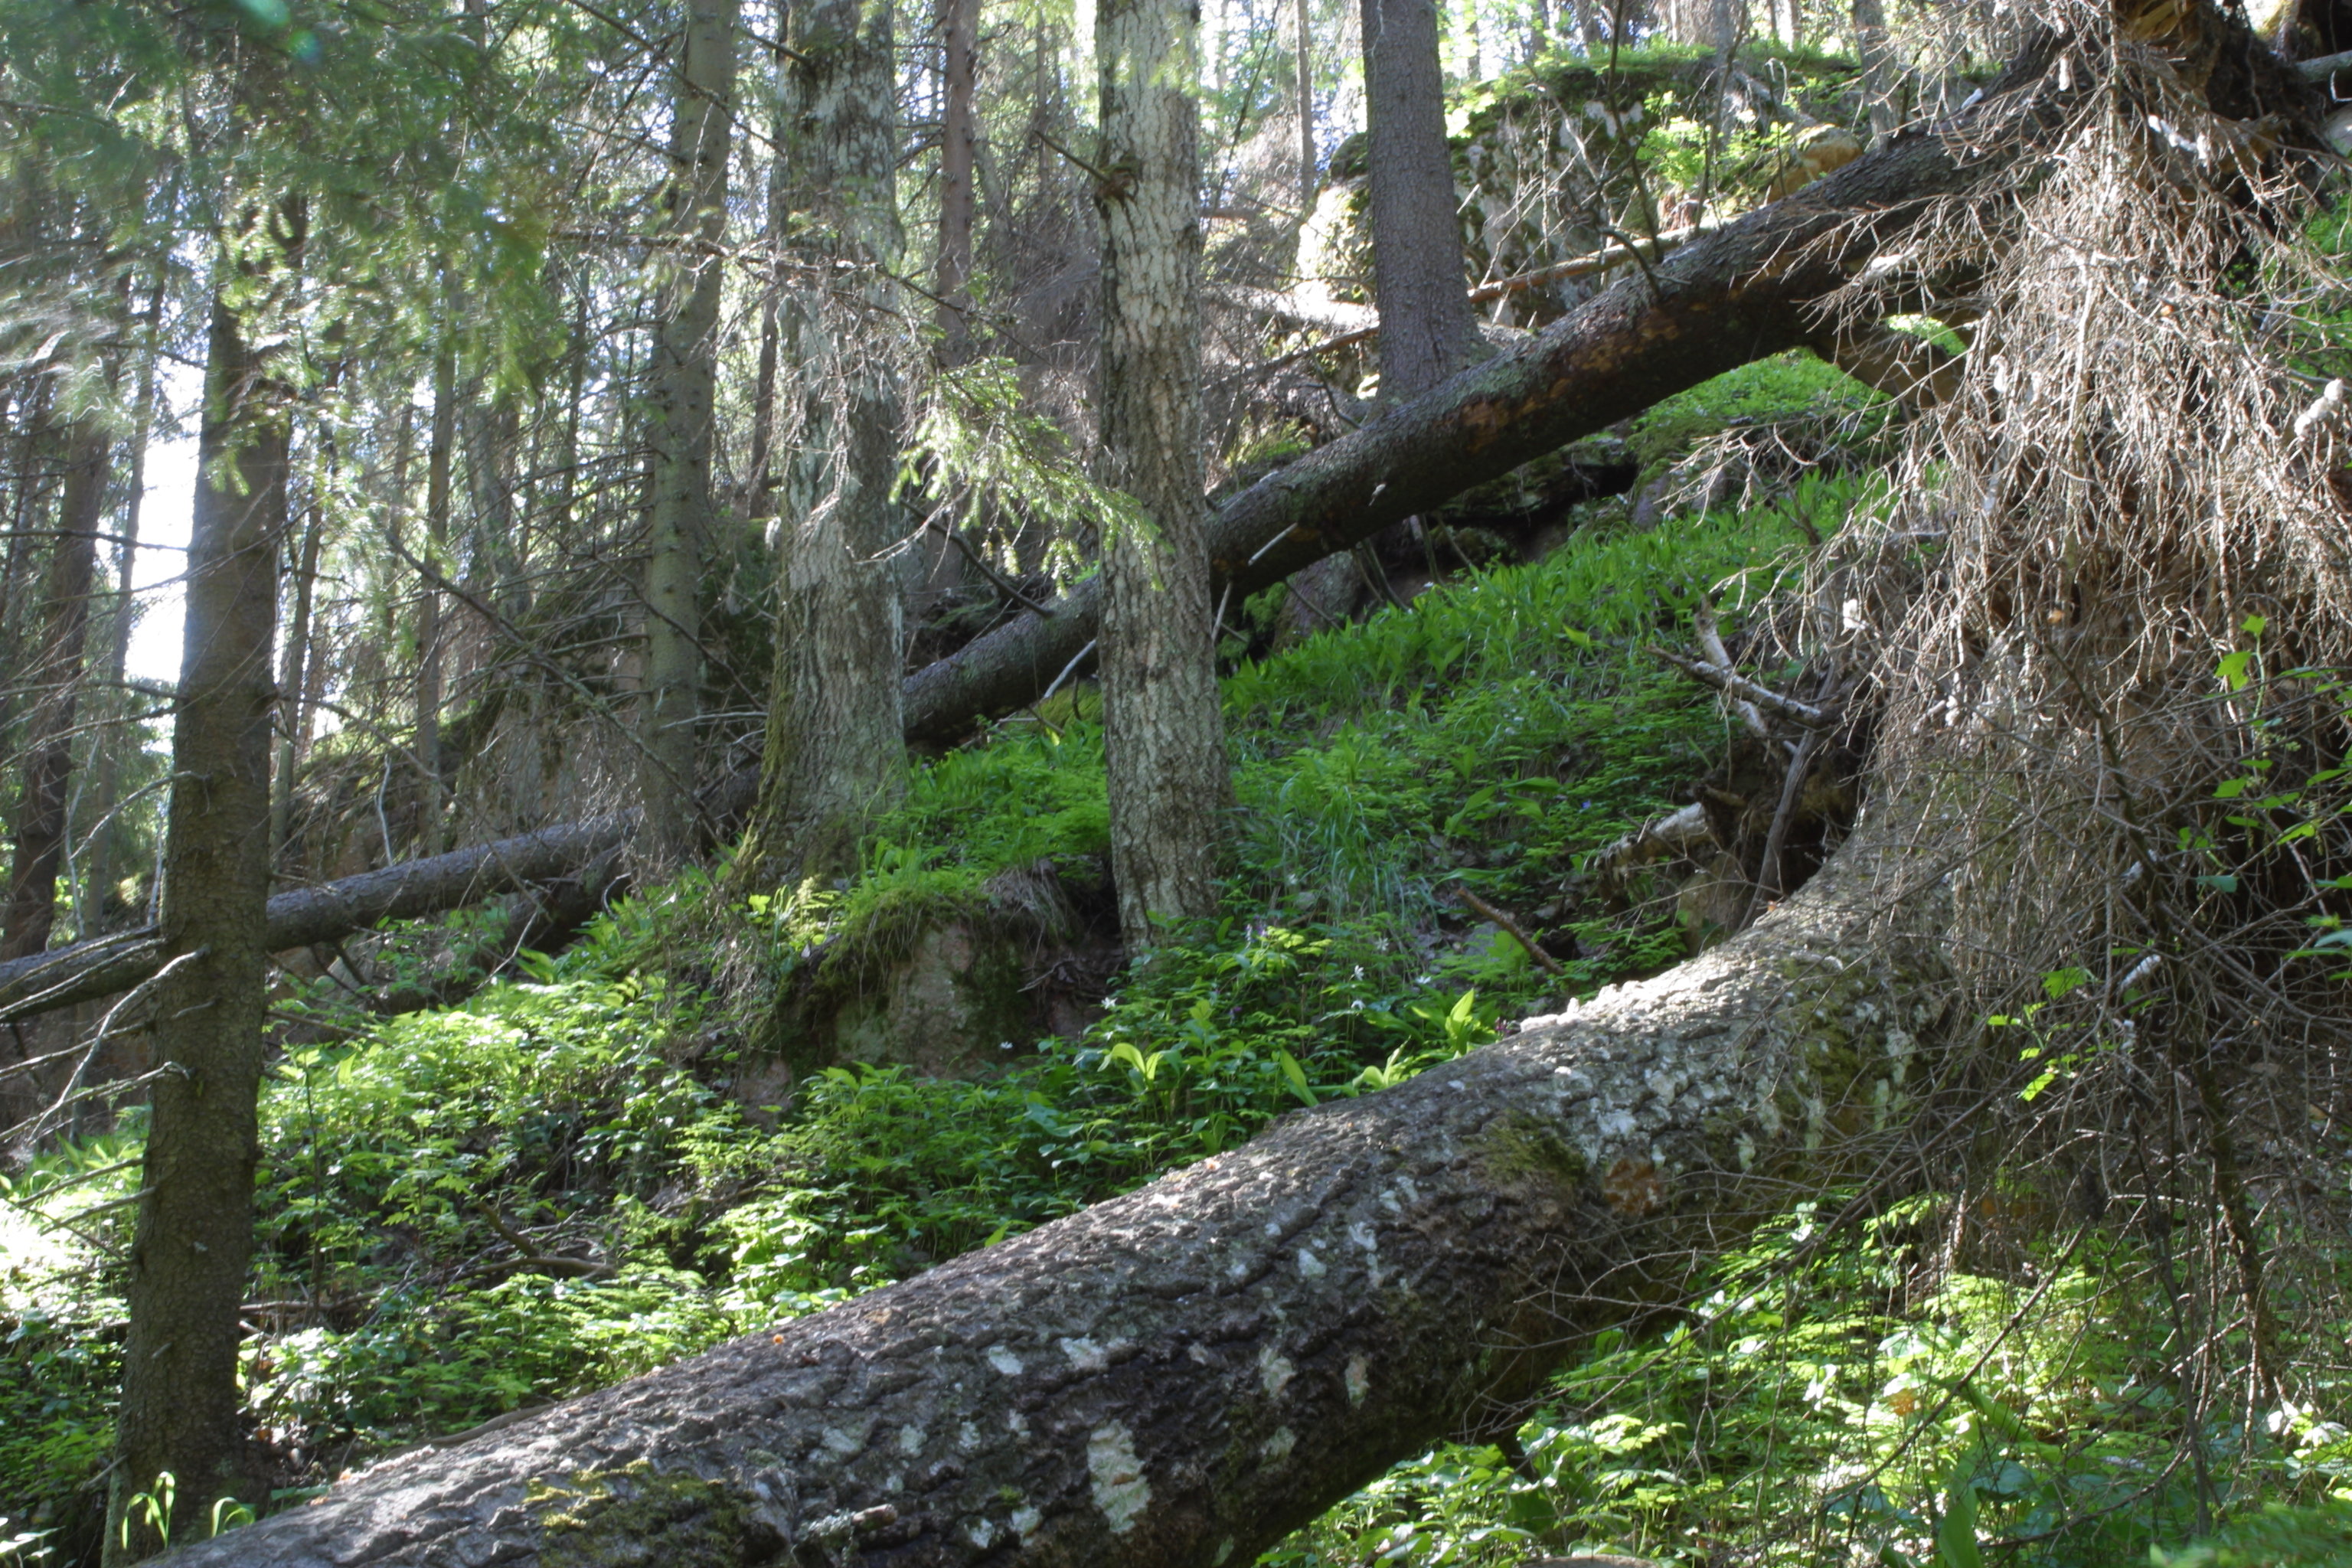 Loss of ”great northern forest” smallest in Finland, says Greenpeace ...